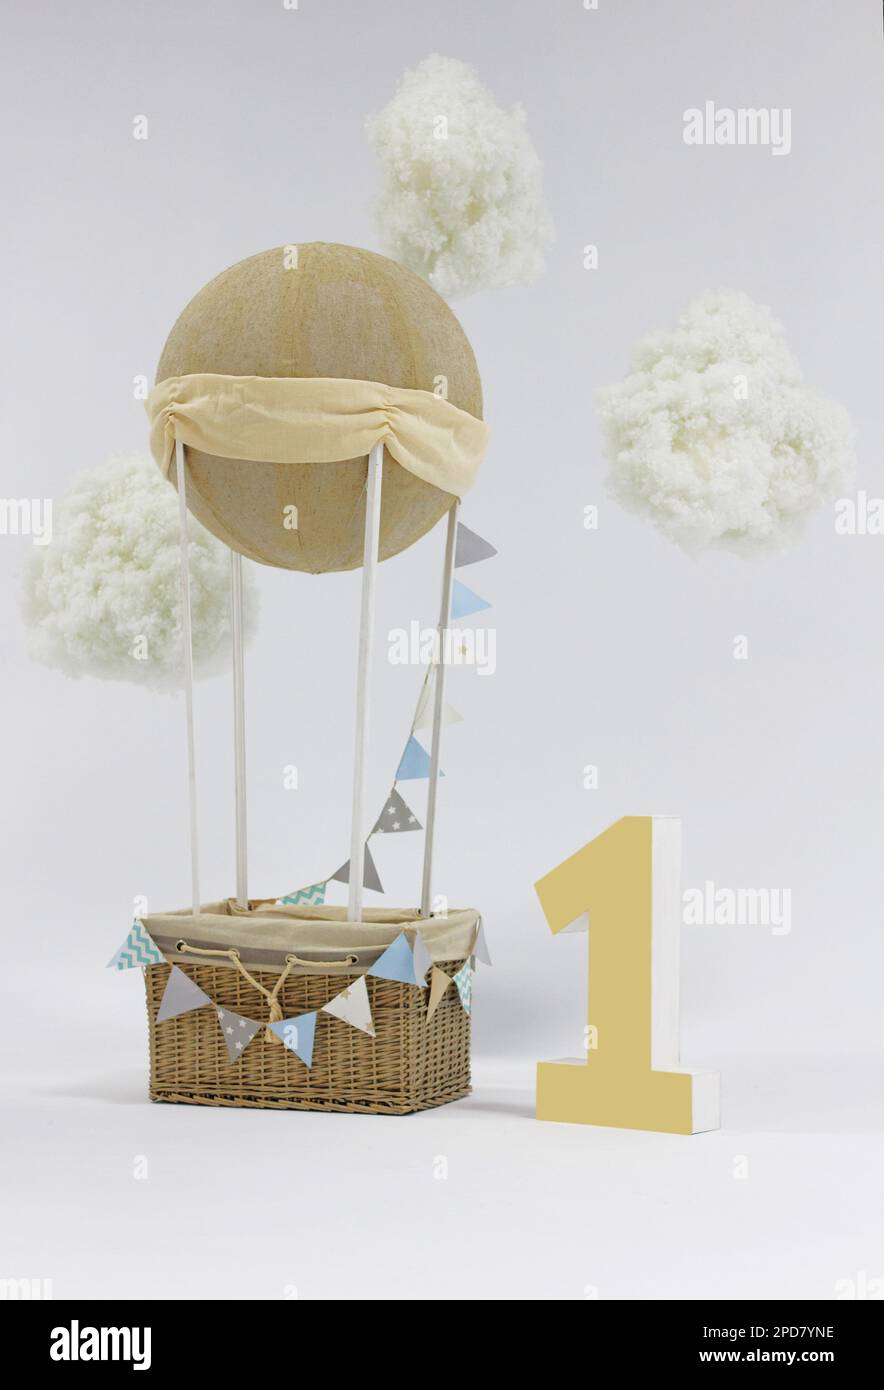 A decorative holiday balloon with a basket, tags and clouds installed in a photo studio and a big number one. Beautiful decor for festive photo shoots Stock Photo